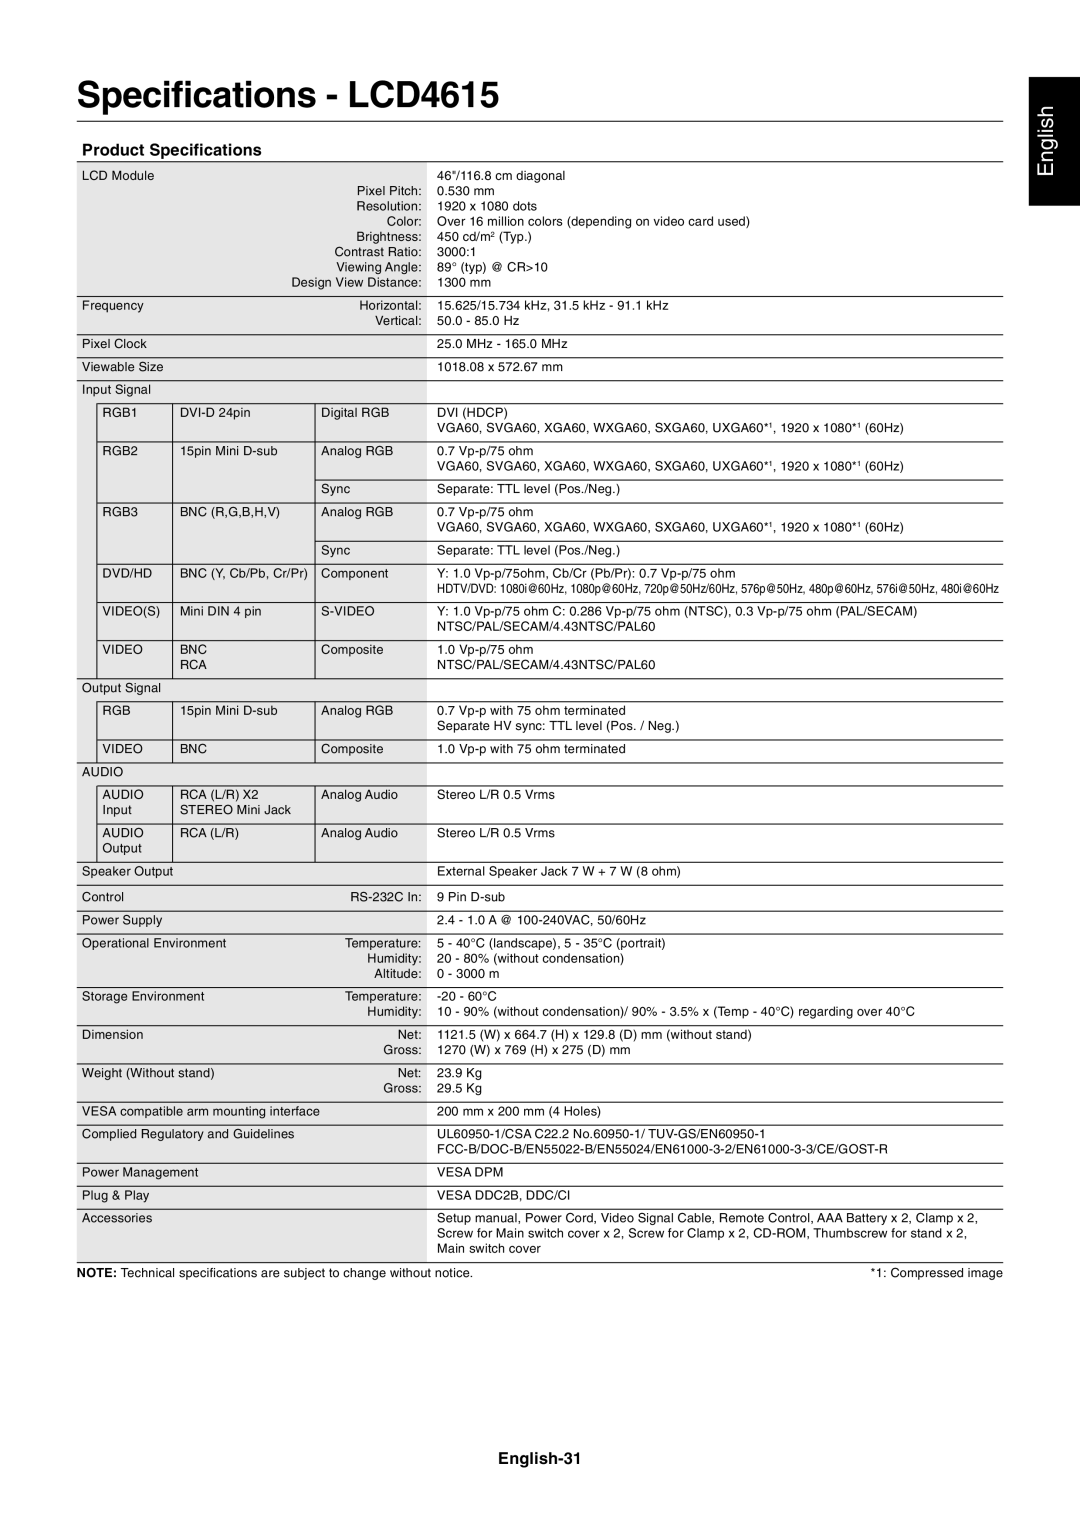 NEC user manual Specifications - LCD4615, English 